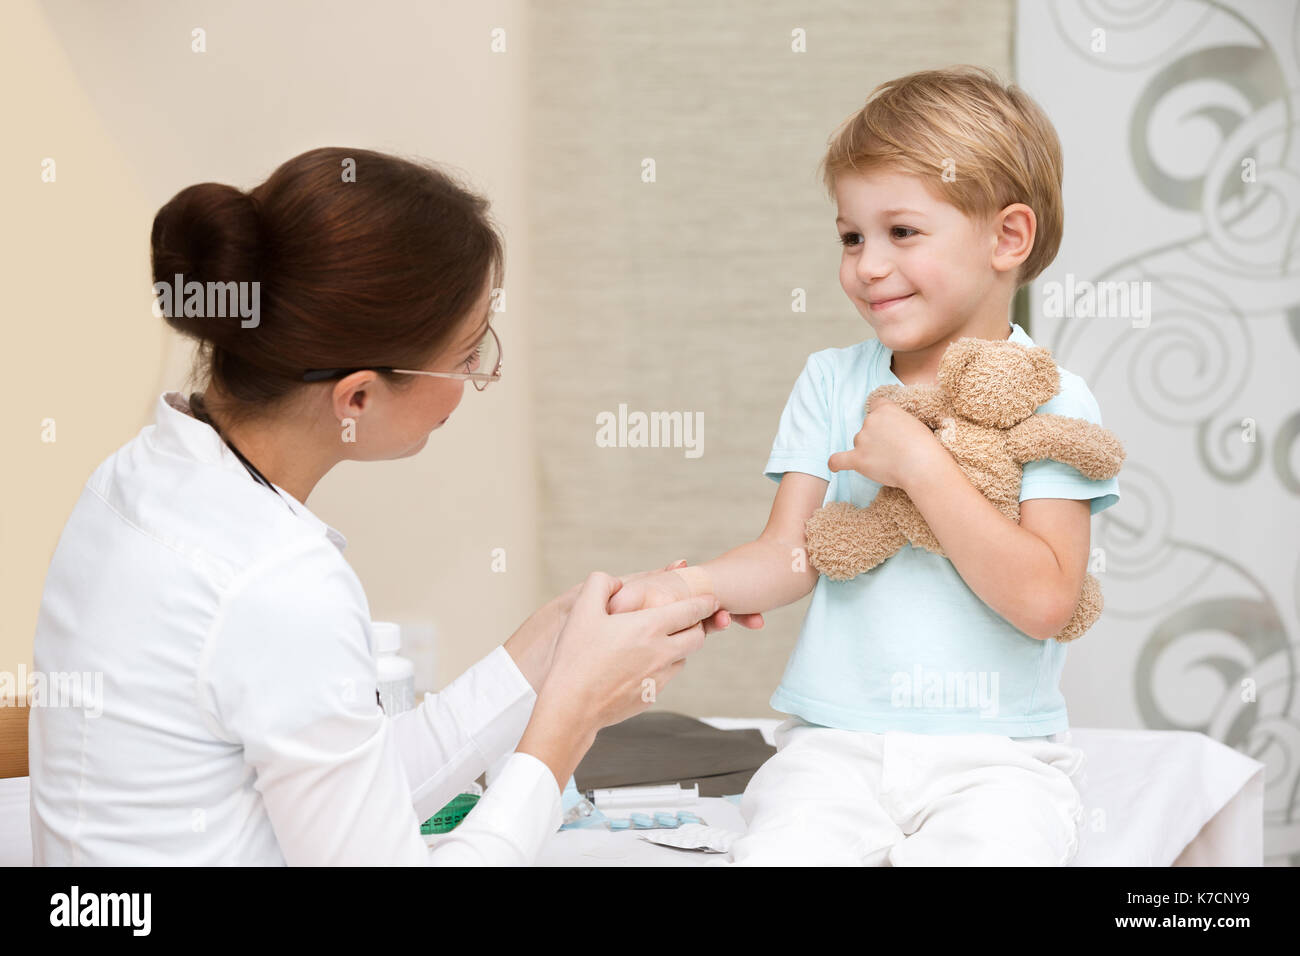 Cute smiling boy at the doctor with his little toy friend, not affraid to visit pediatrician, happy healthy childhood Stock Photo